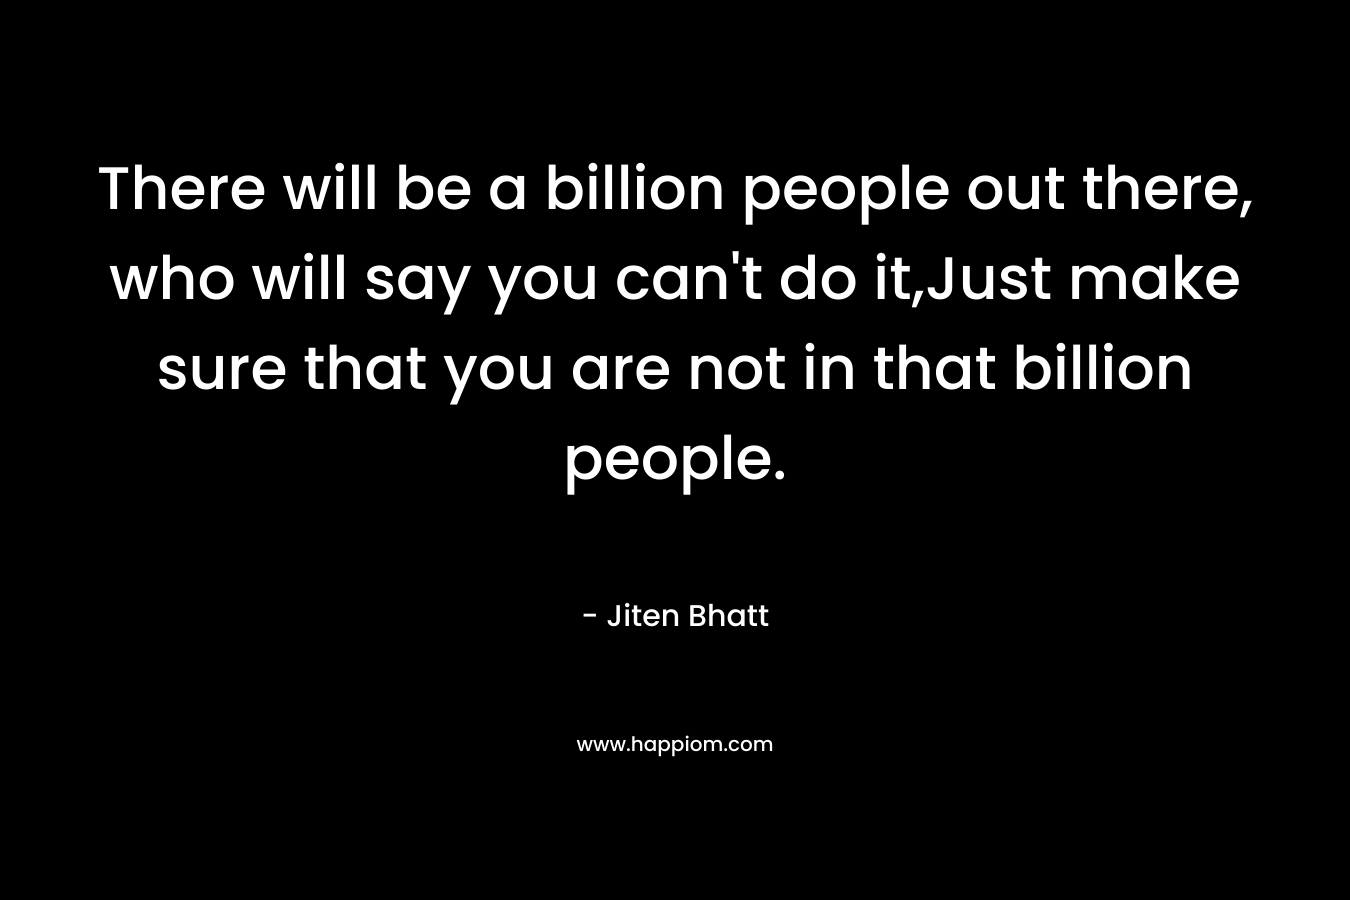 There will be a billion people out there, who will say you can't do it,Just make sure that you are not in that billion people.